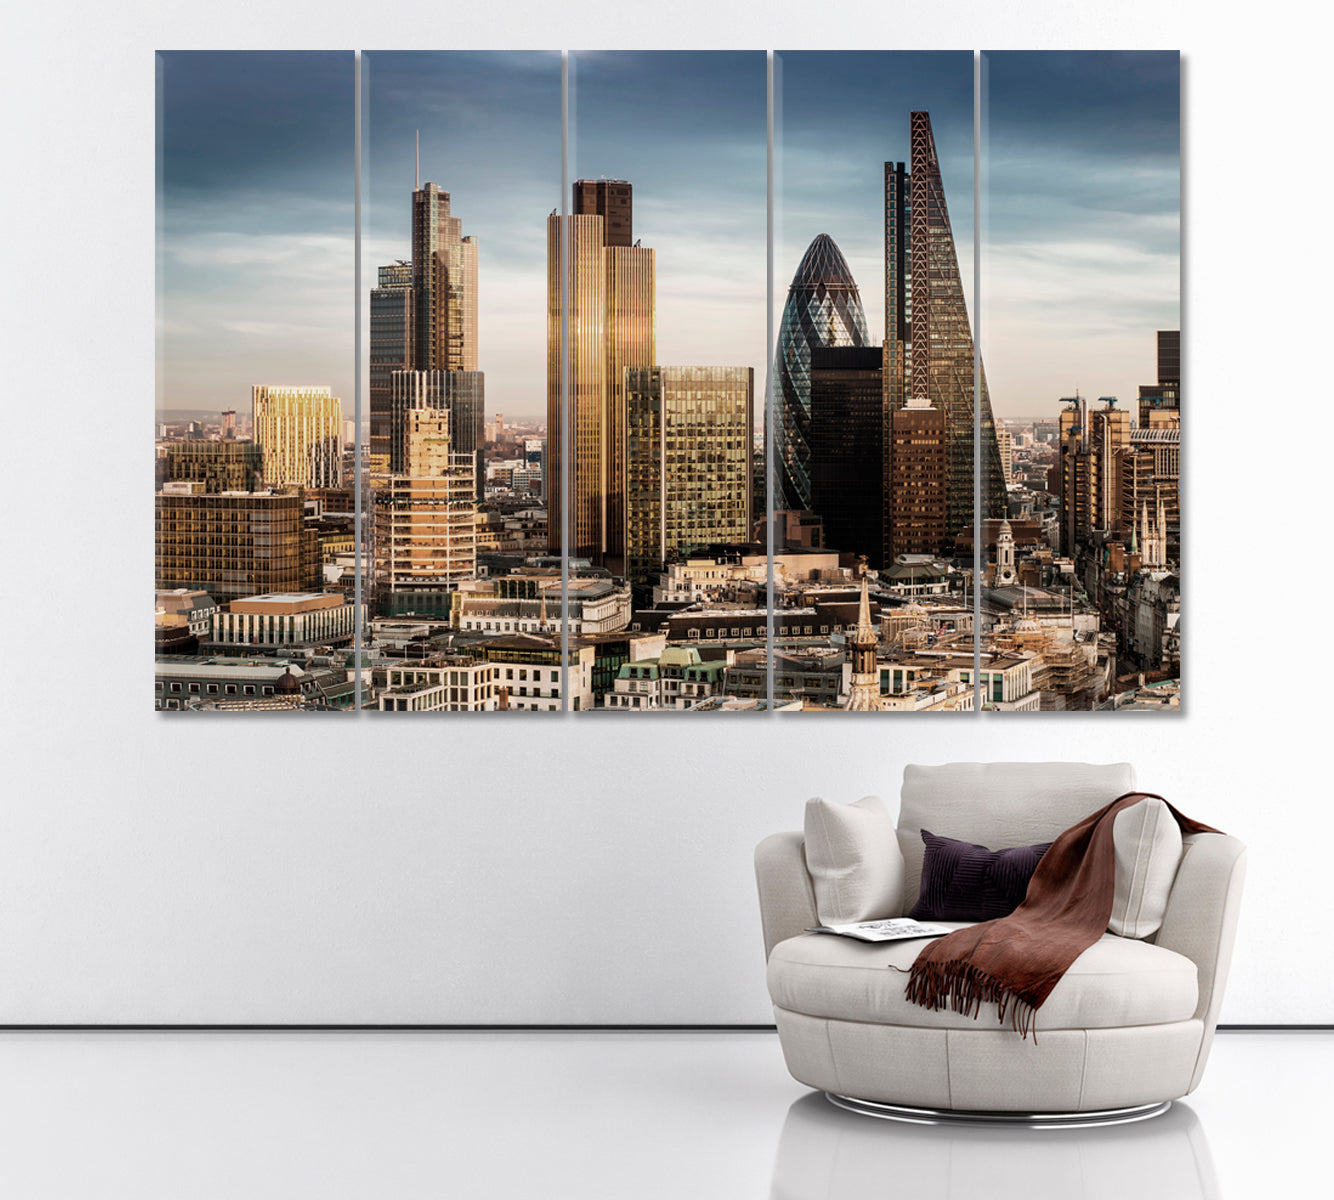 London Central Business District England Canvas Print ArtLexy 5 Panels 36"x24" inches 